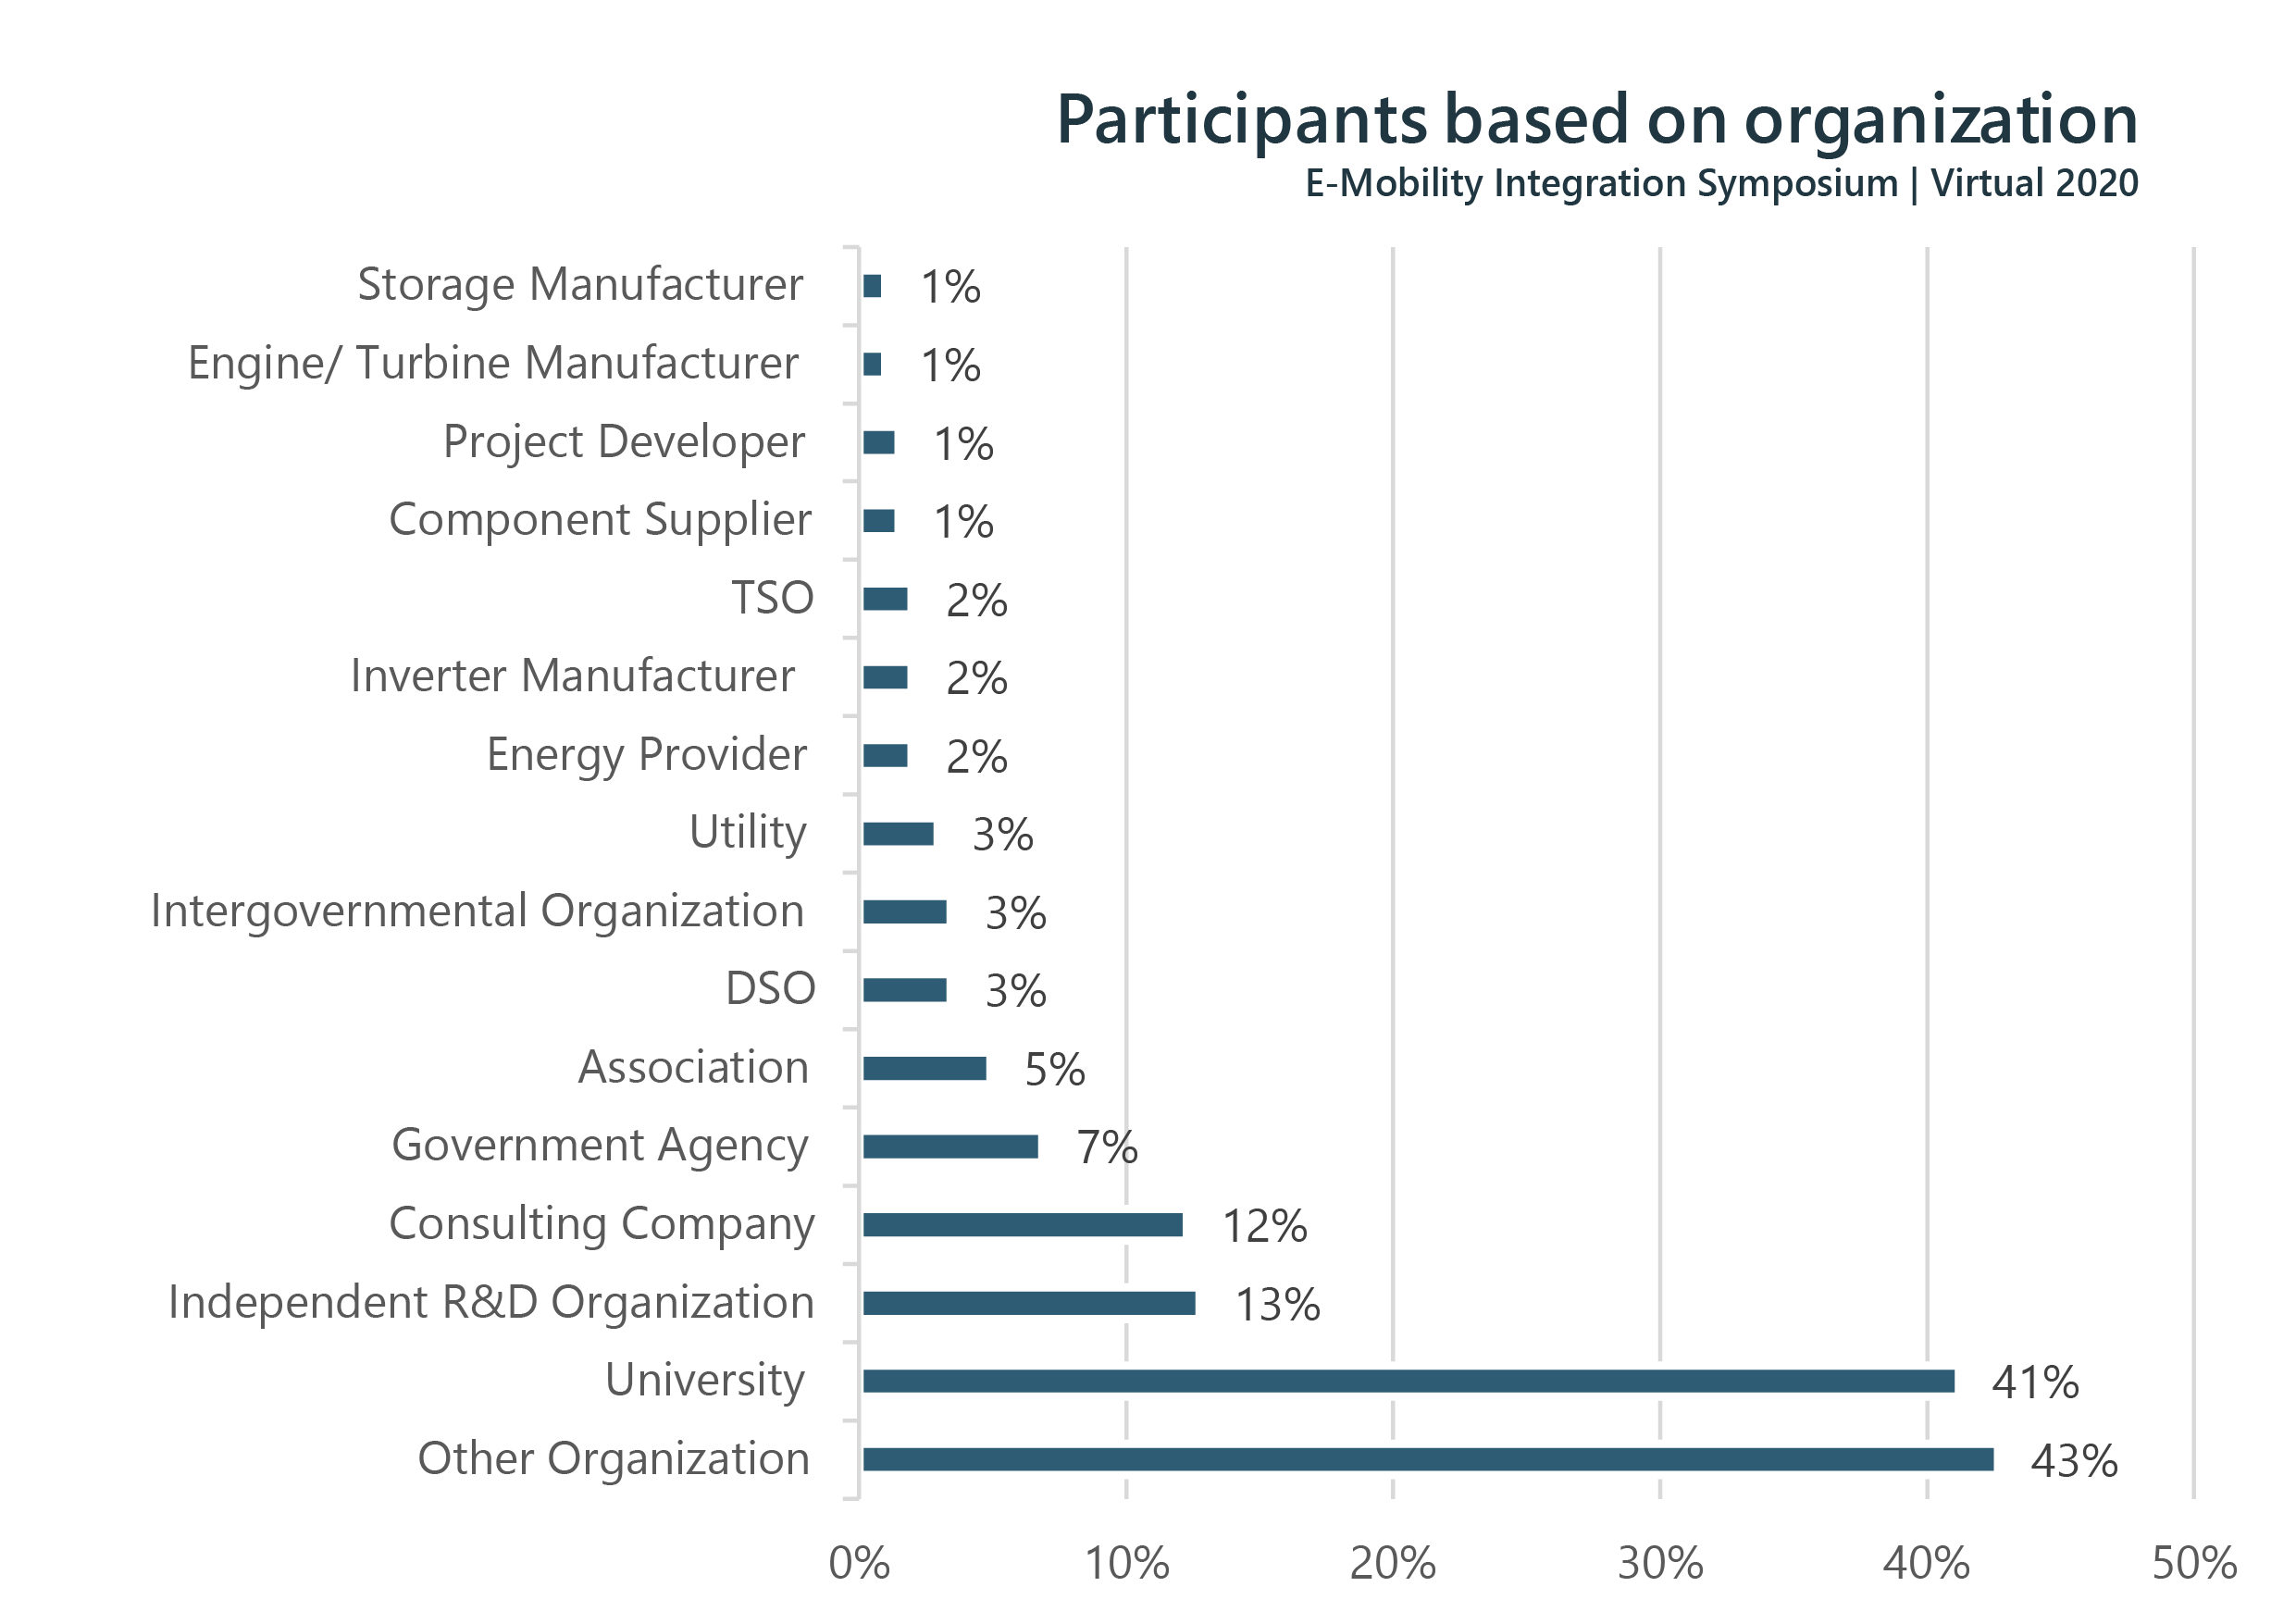 Figure 3: Structure of participants based on organization type at the 4rd E-Mobility Integration Symposium in 2020.